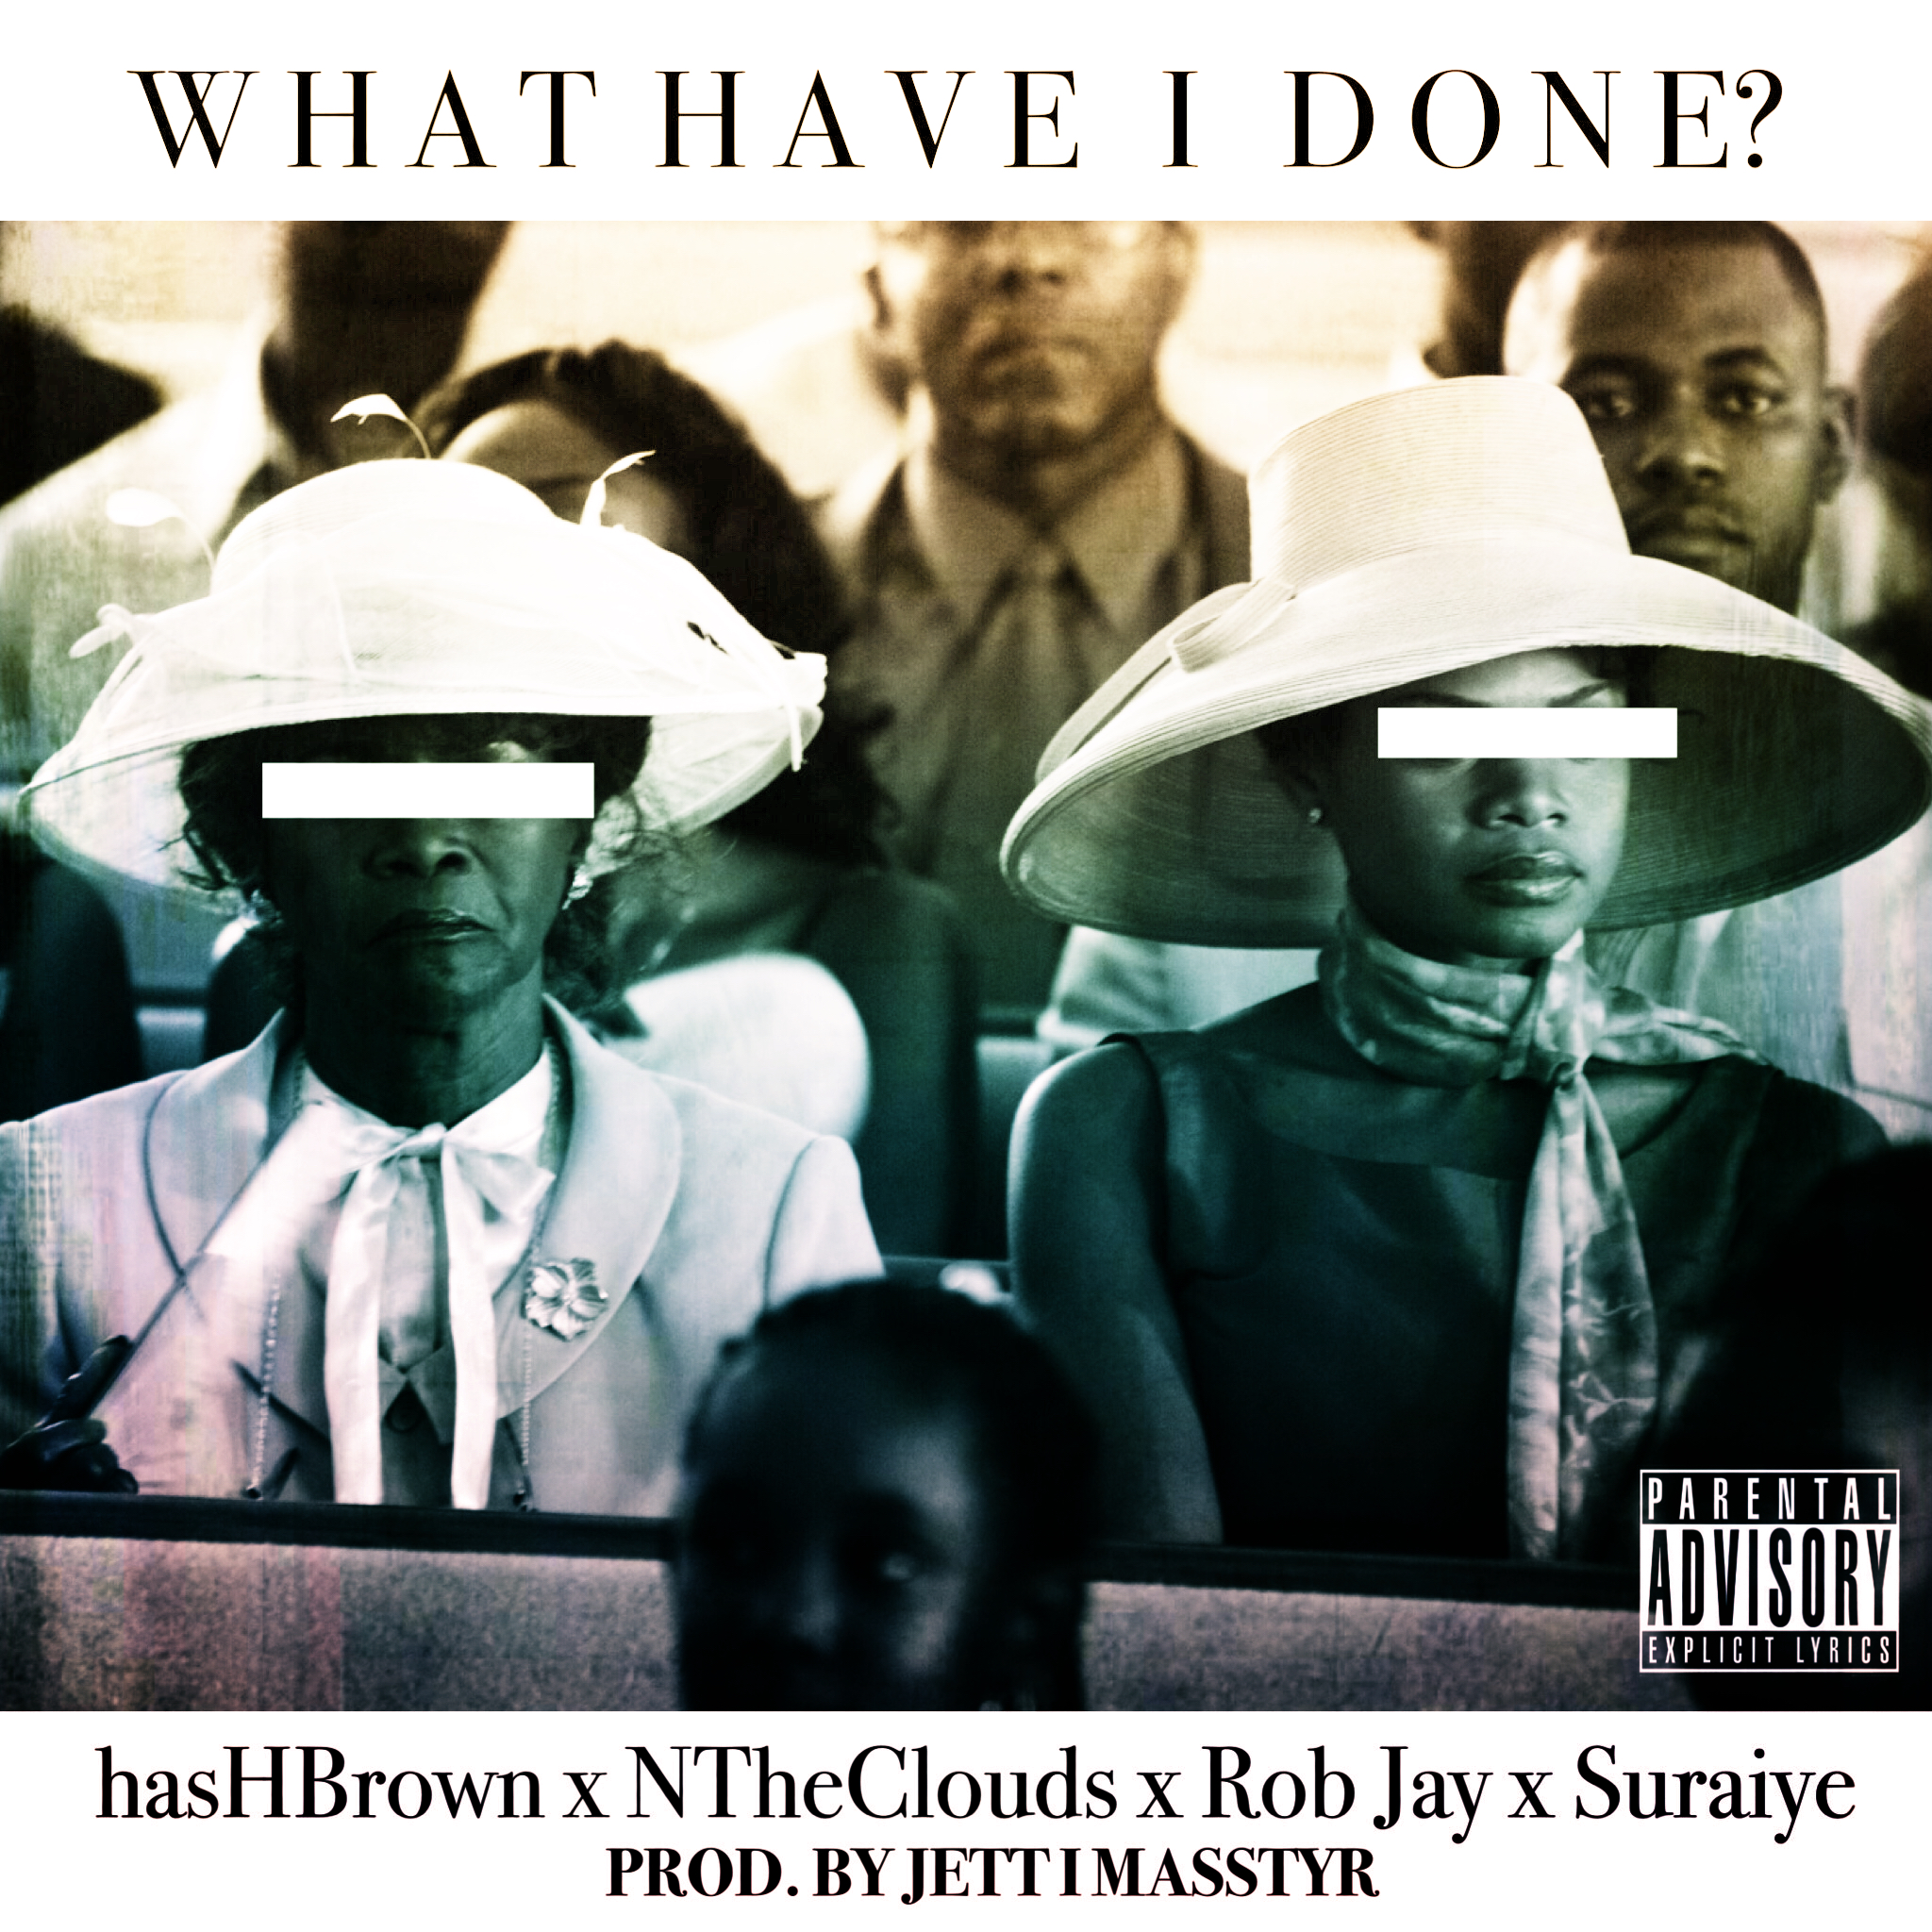 hasHBrown – “What Have I Done?” (ft. NTheClouds, Rob Jay, Suraiye) – prod. Jett I Masstyr